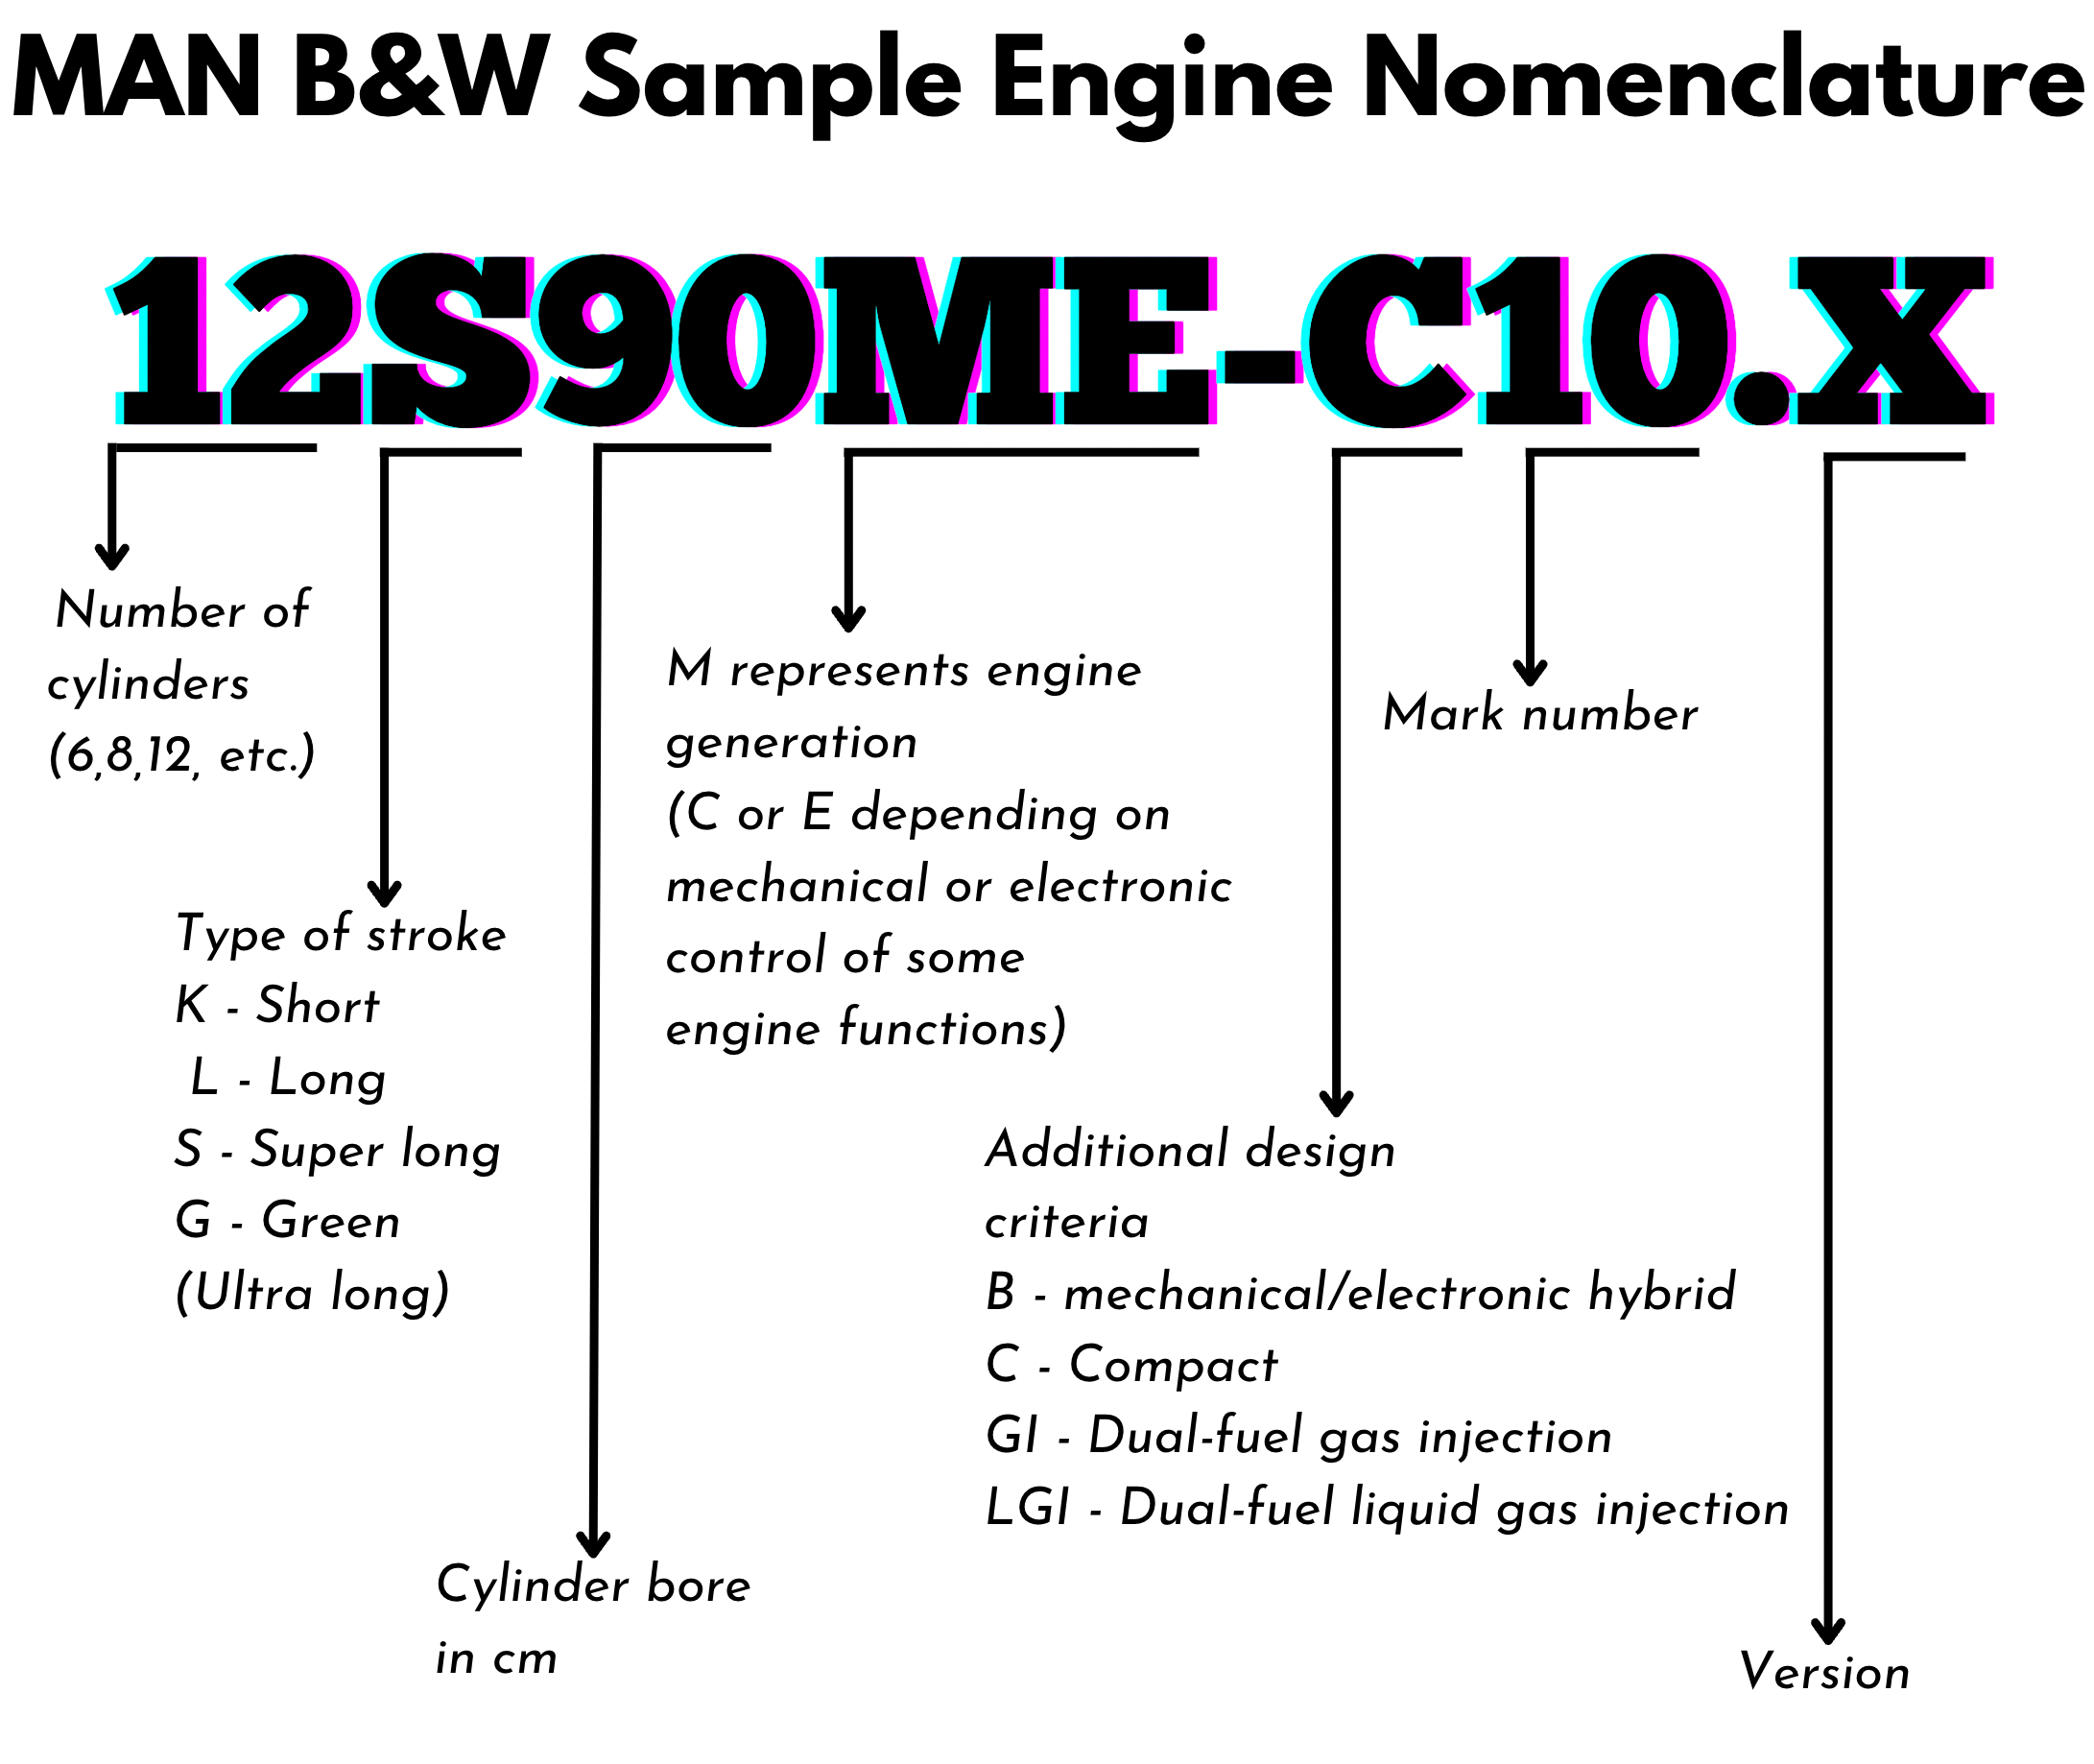 Nomenclature for MAN B&W 2 stroke engines